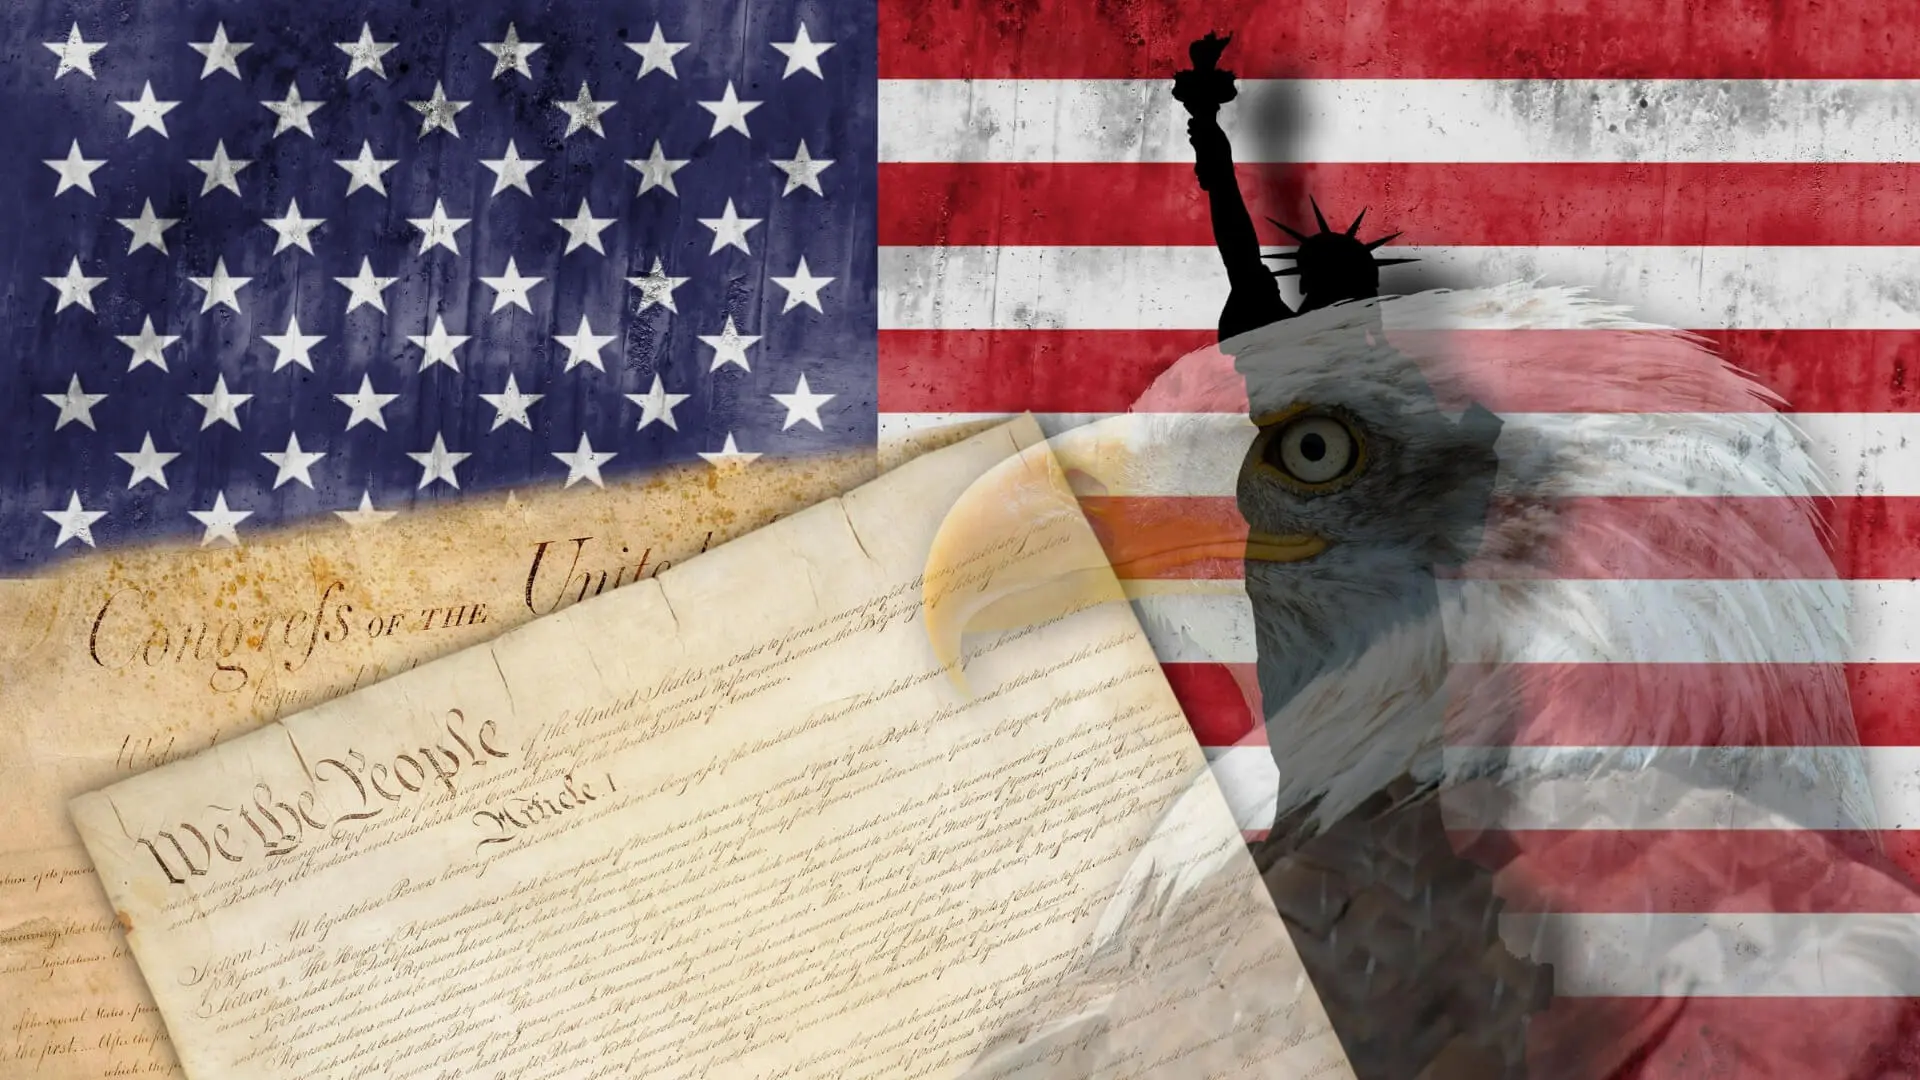 A bald eagle and american flag with the declaration of independence.